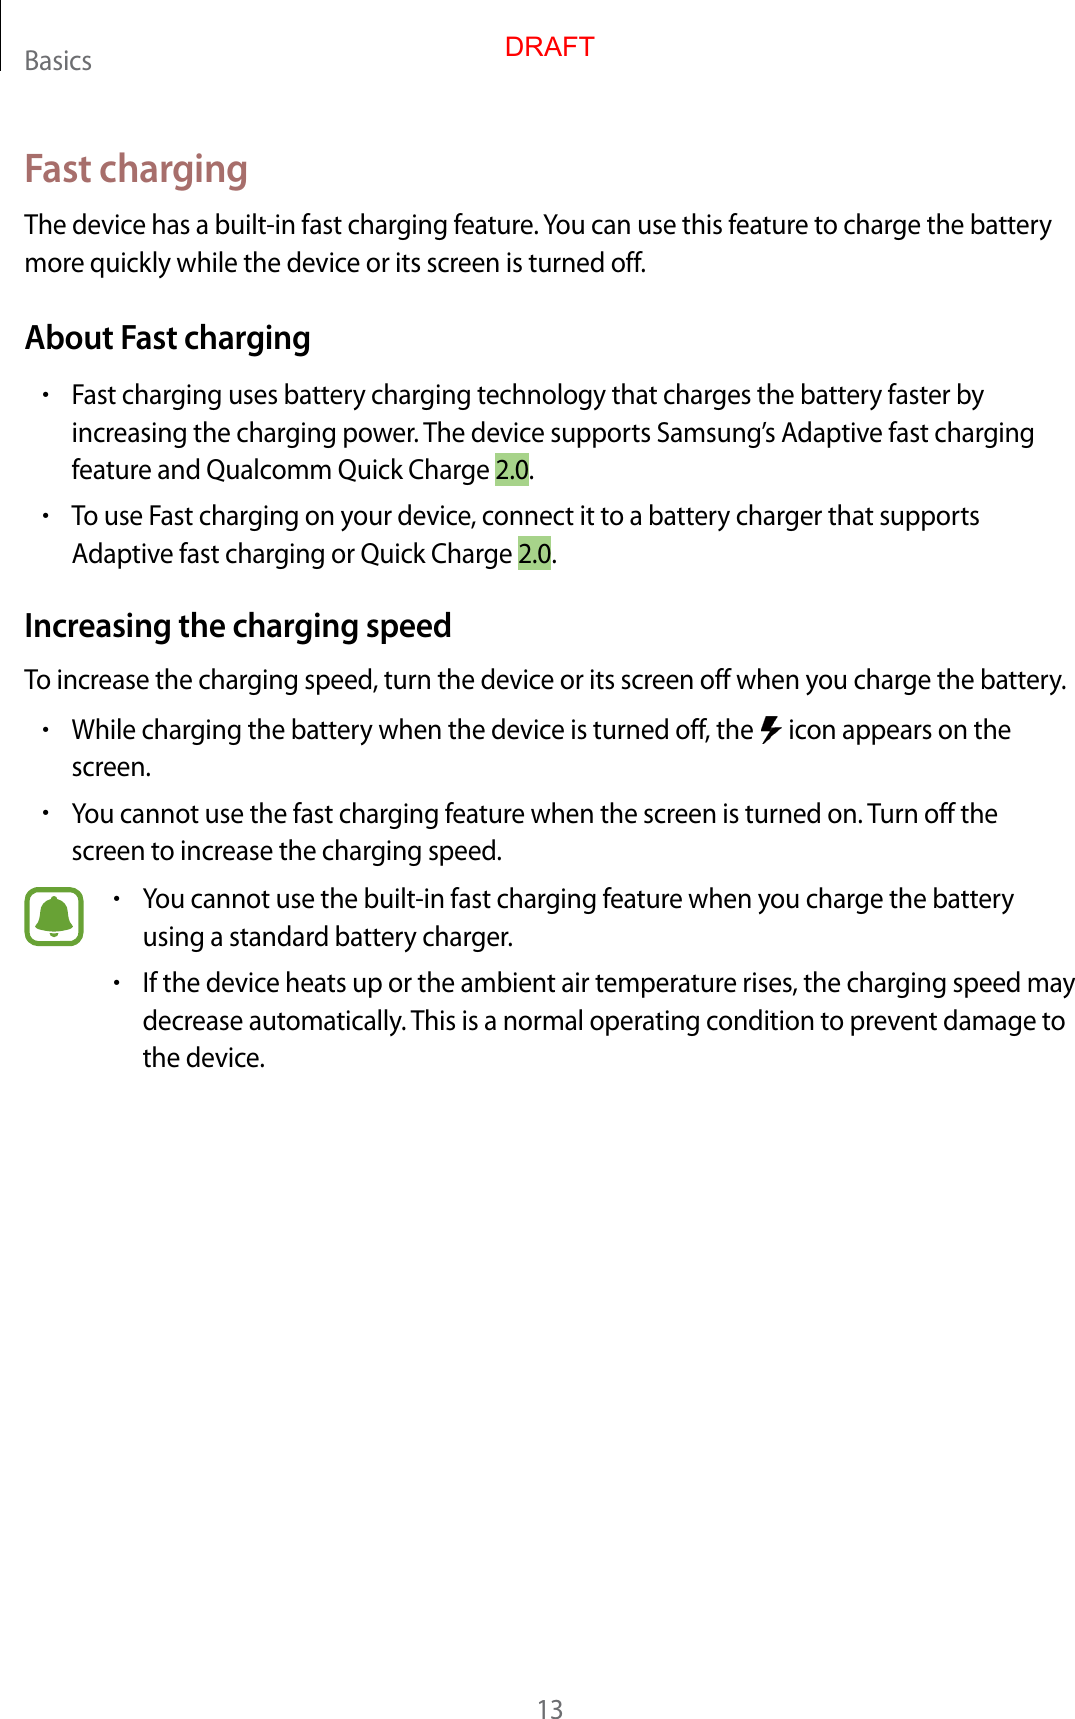 Basics13Fast chargingThe device has a built-in fast charging feature. You can use this feature to charge the battery more quickly while the device or its screen is turned off.About Fast charging•Fast charging uses battery charging technology that charges the battery faster by increasing the charging power. The device supports Samsung’s Adaptive fast charging feature and Qualcomm Quick Charge 2.0.•To use Fast charging on your device, connect it to a battery charger that supports Adaptive fast charging or Quick Charge 2.0.Increasing the charging speedTo increase the charging speed, turn the device or its screen off when you charge the battery.•While charging the battery when the device is turned off, the   icon appears on the screen.•You cannot use the fast charging feature when the screen is turned on. Turn off the screen to increase the charging speed.•You cannot use the built-in fast charging feature when you charge the battery using a standard battery charger.•If the device heats up or the ambient air temperature rises, the charging speed may decrease automatically. This is a normal operating condition to prevent damage to the device.DRAFT